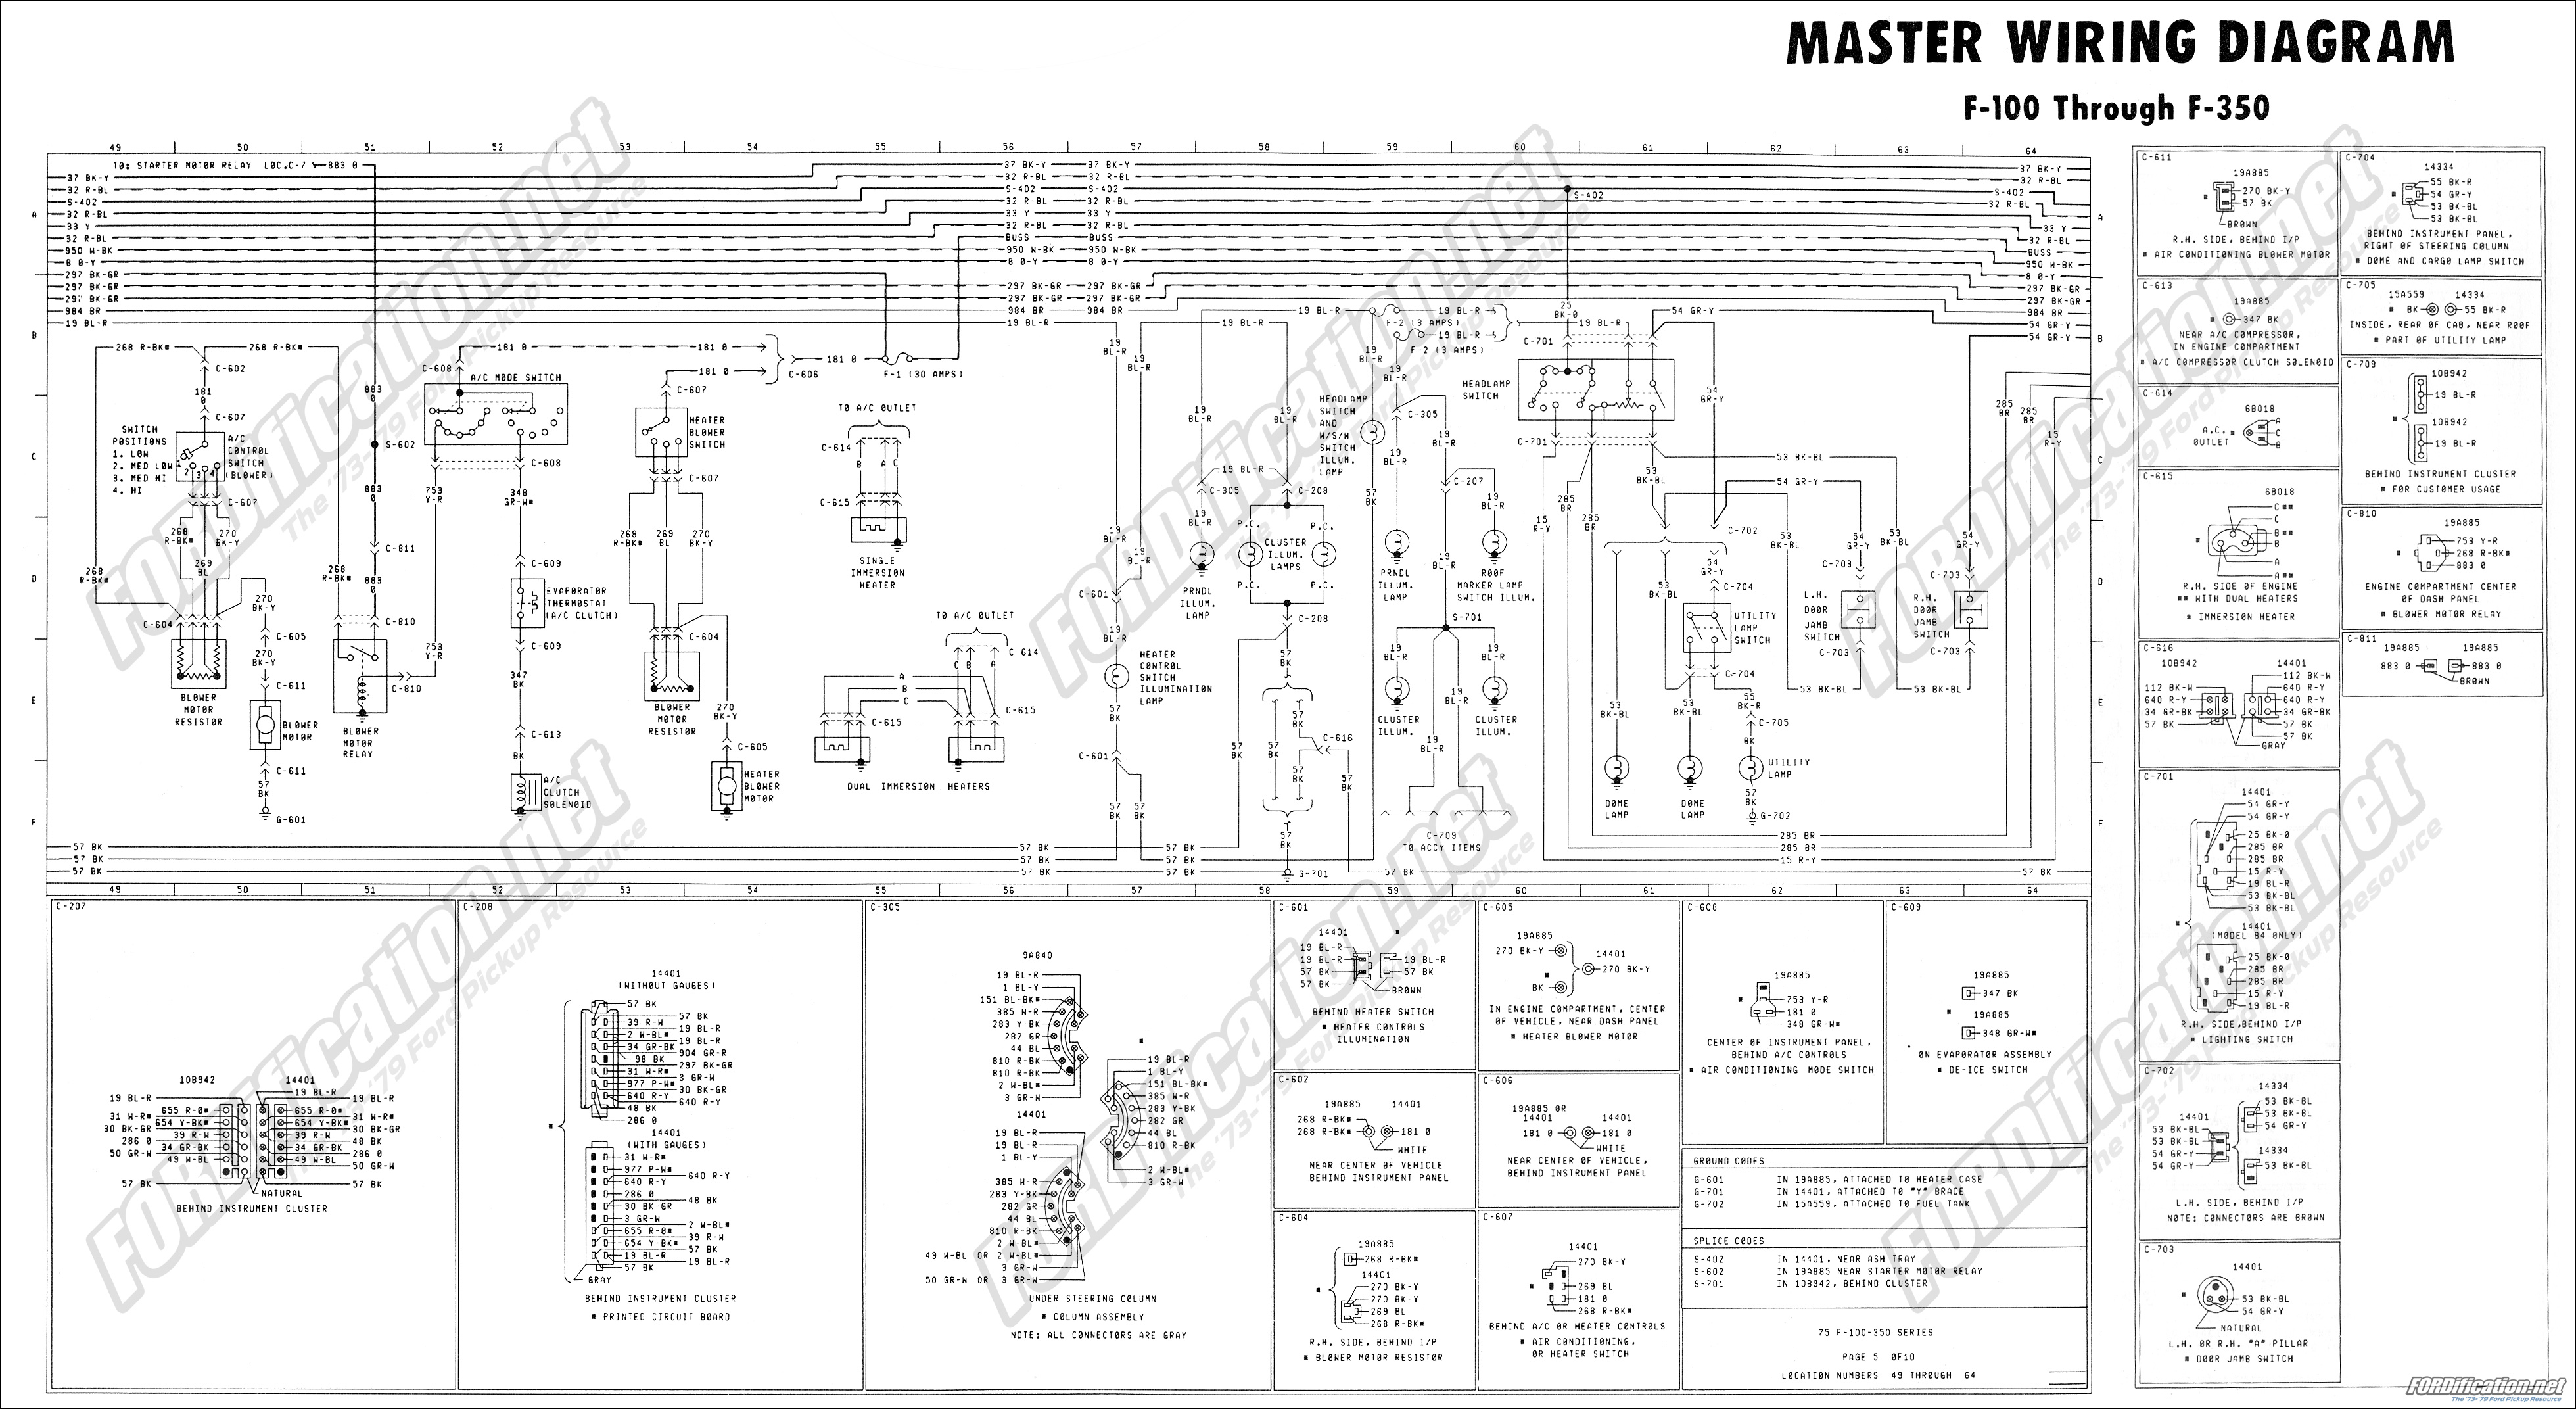 1973-1979 Ford Truck Wiring Diagrams & Schematics - FORDification.net  Ignition Wiring Diagram For 76 Ford F250    FORDification.net